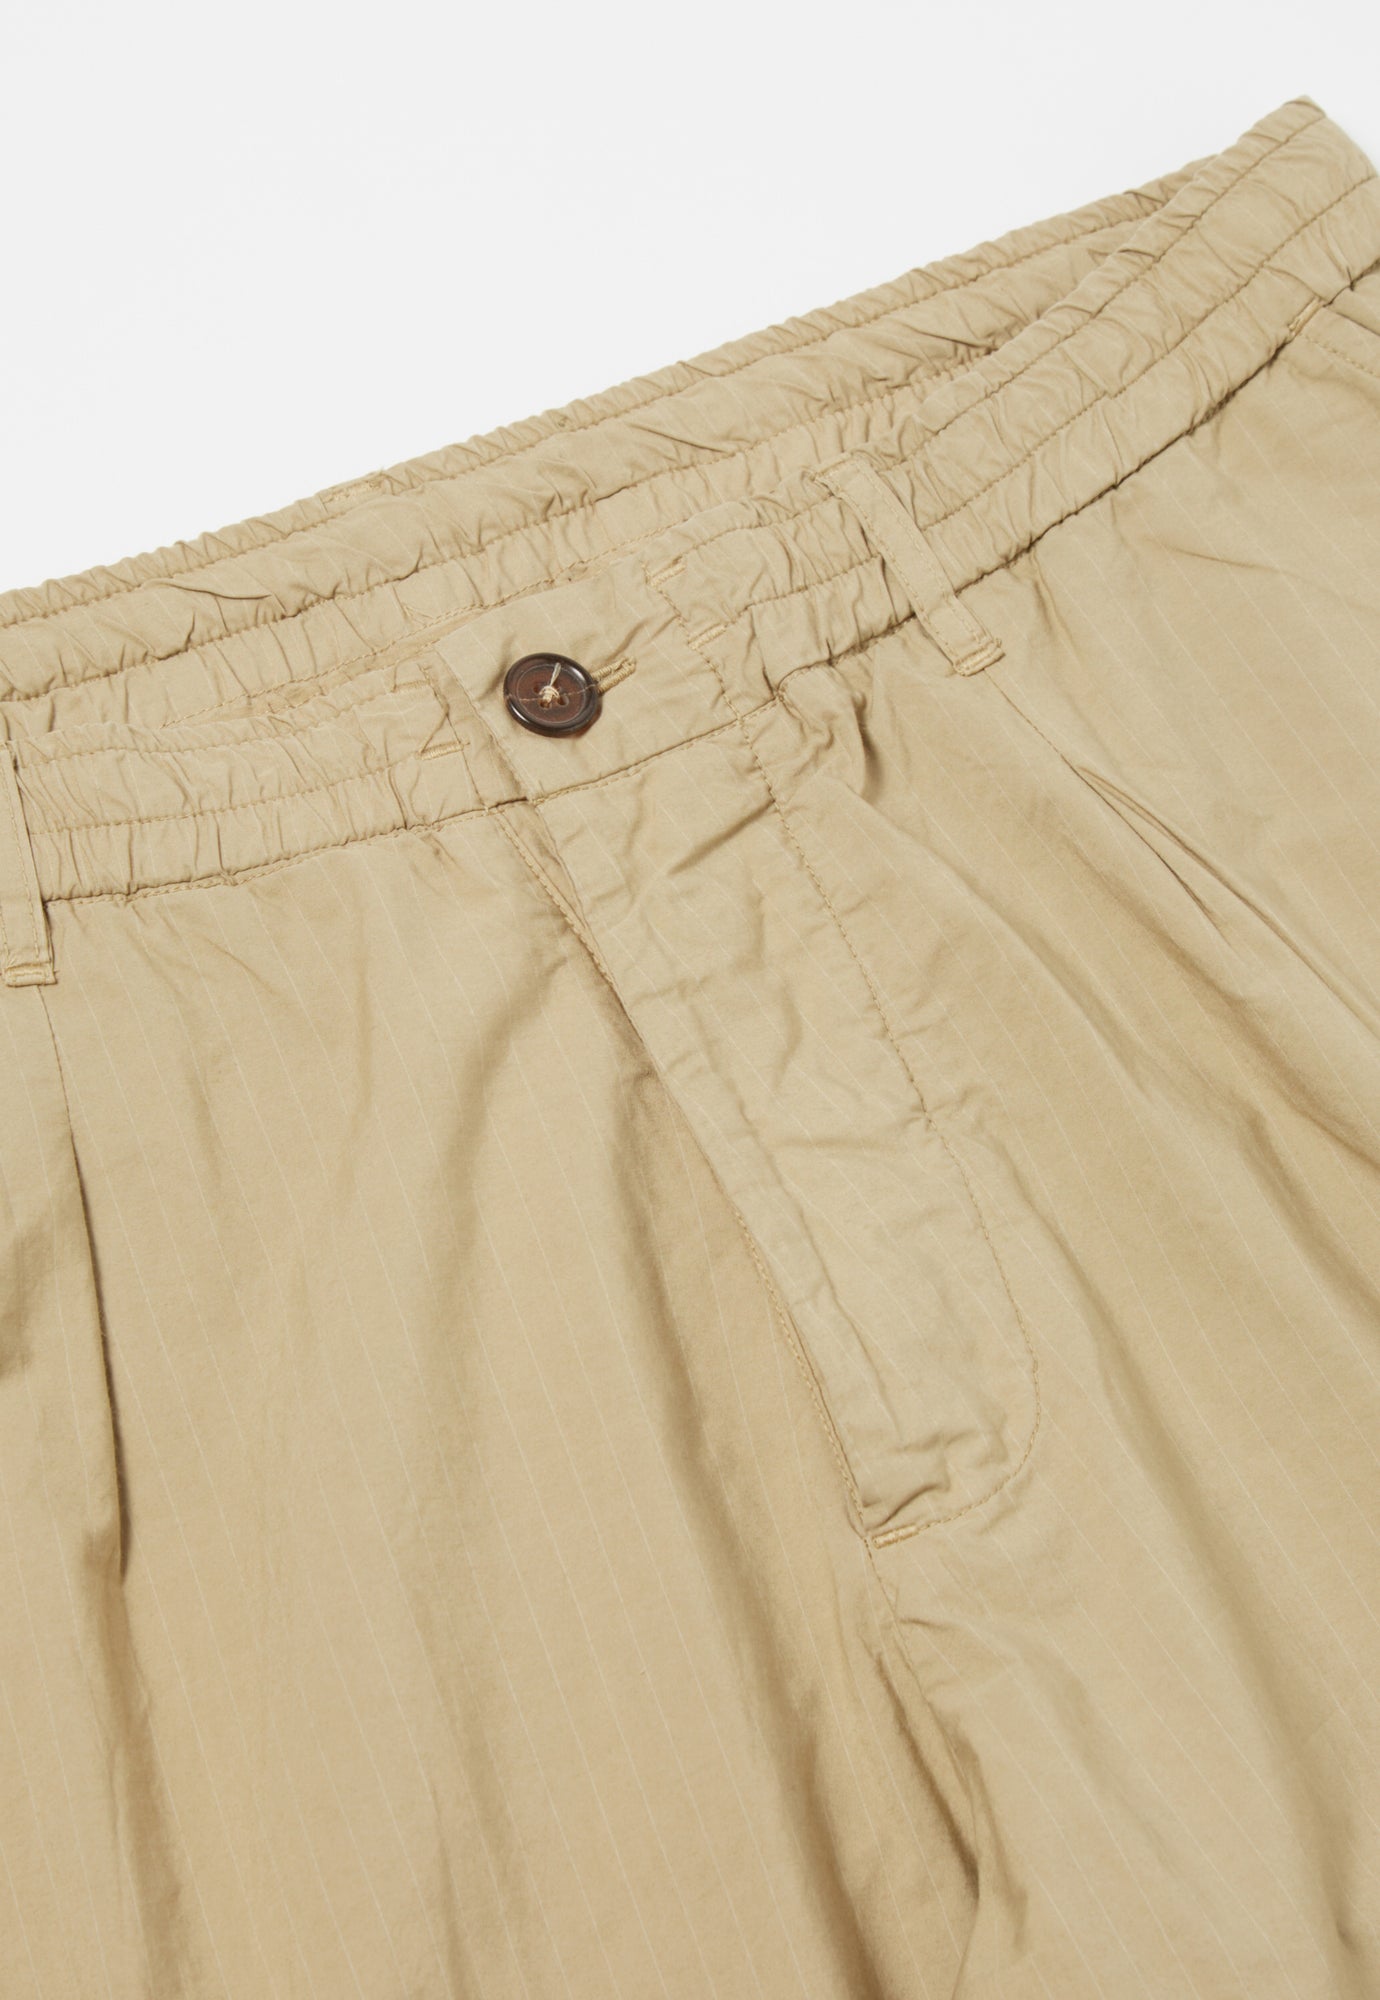 Universal Works Oxford Pant in Summer Oak Nearly Pinstripe